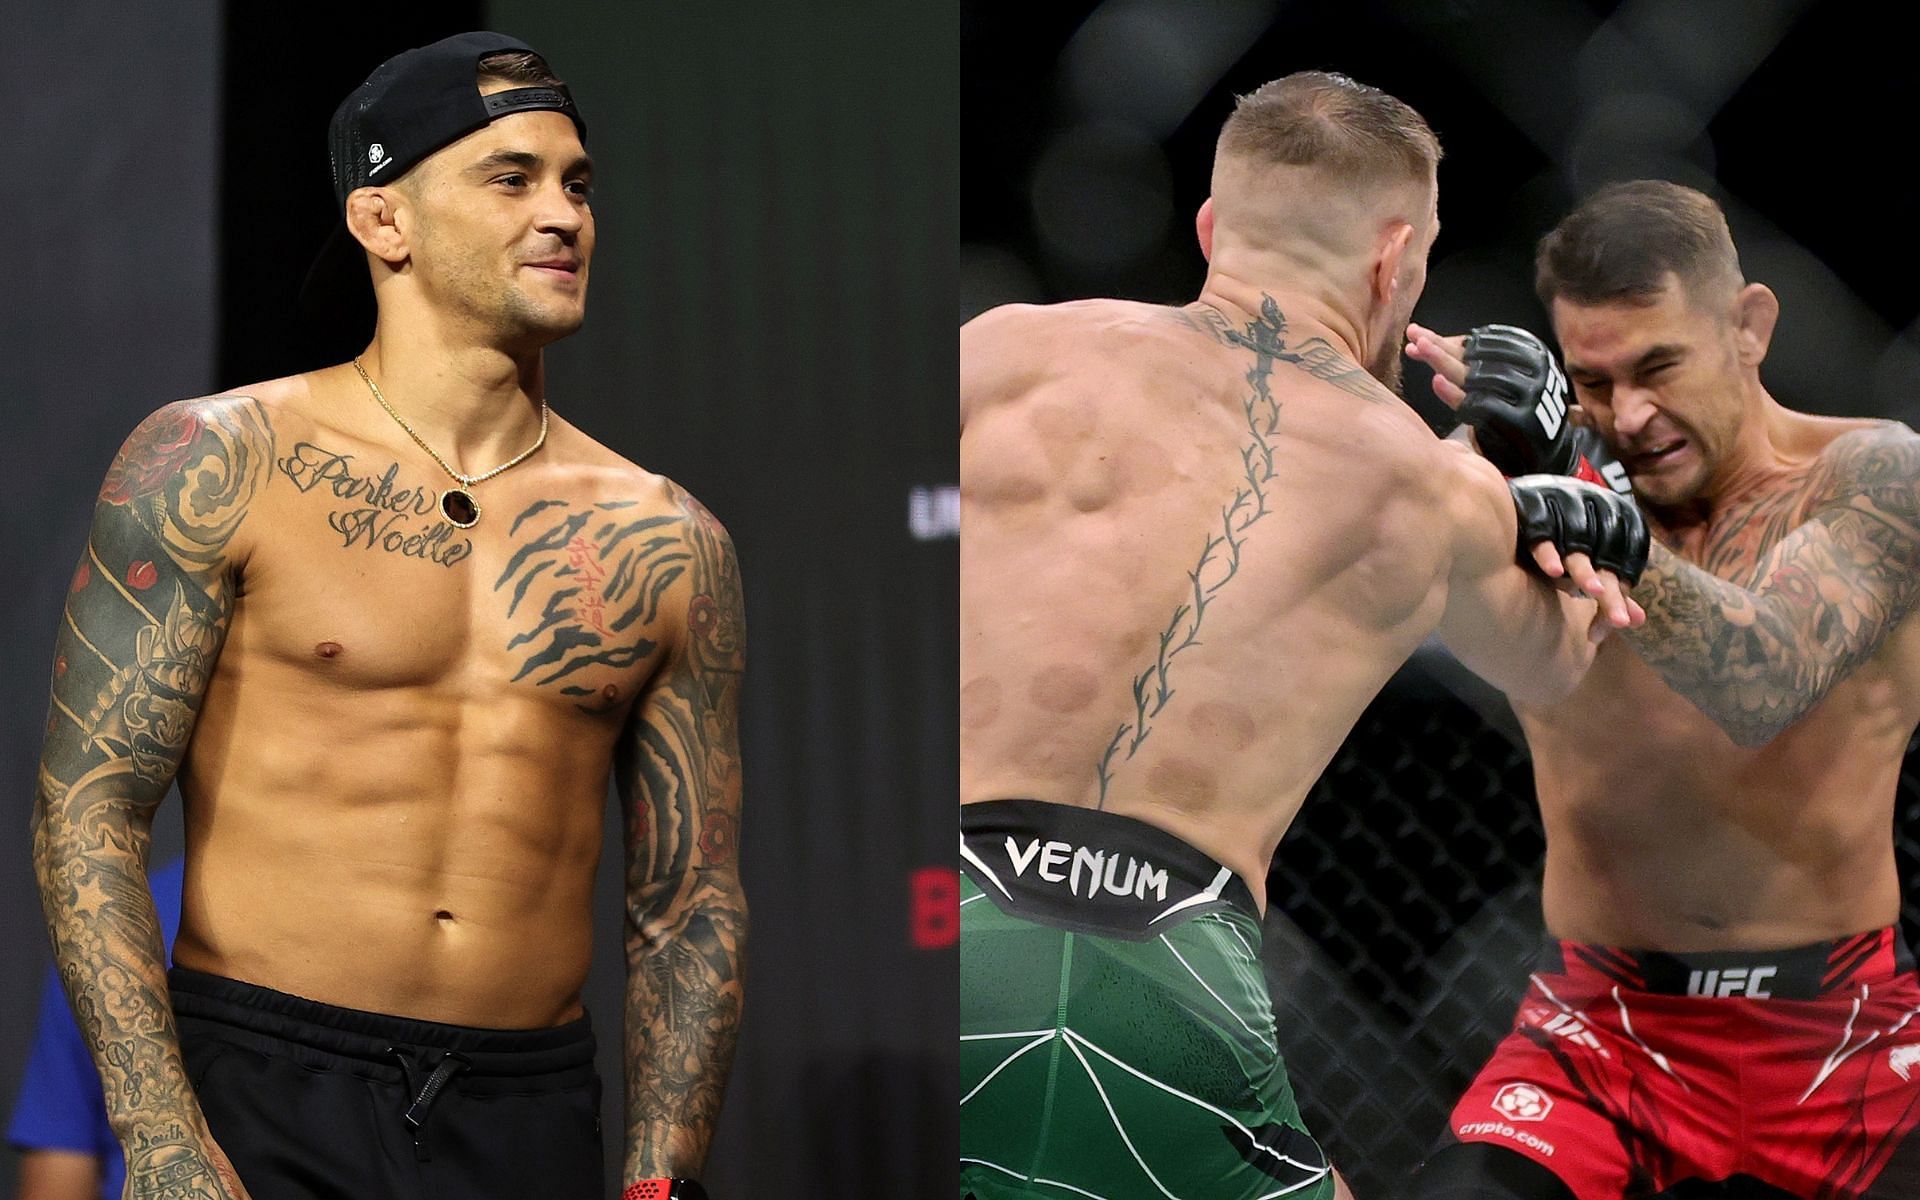 No.1 UFC lightweight contender Dustin Poirier (left) and action from his latest fight against Conor McGregor at UFC 264 (right)